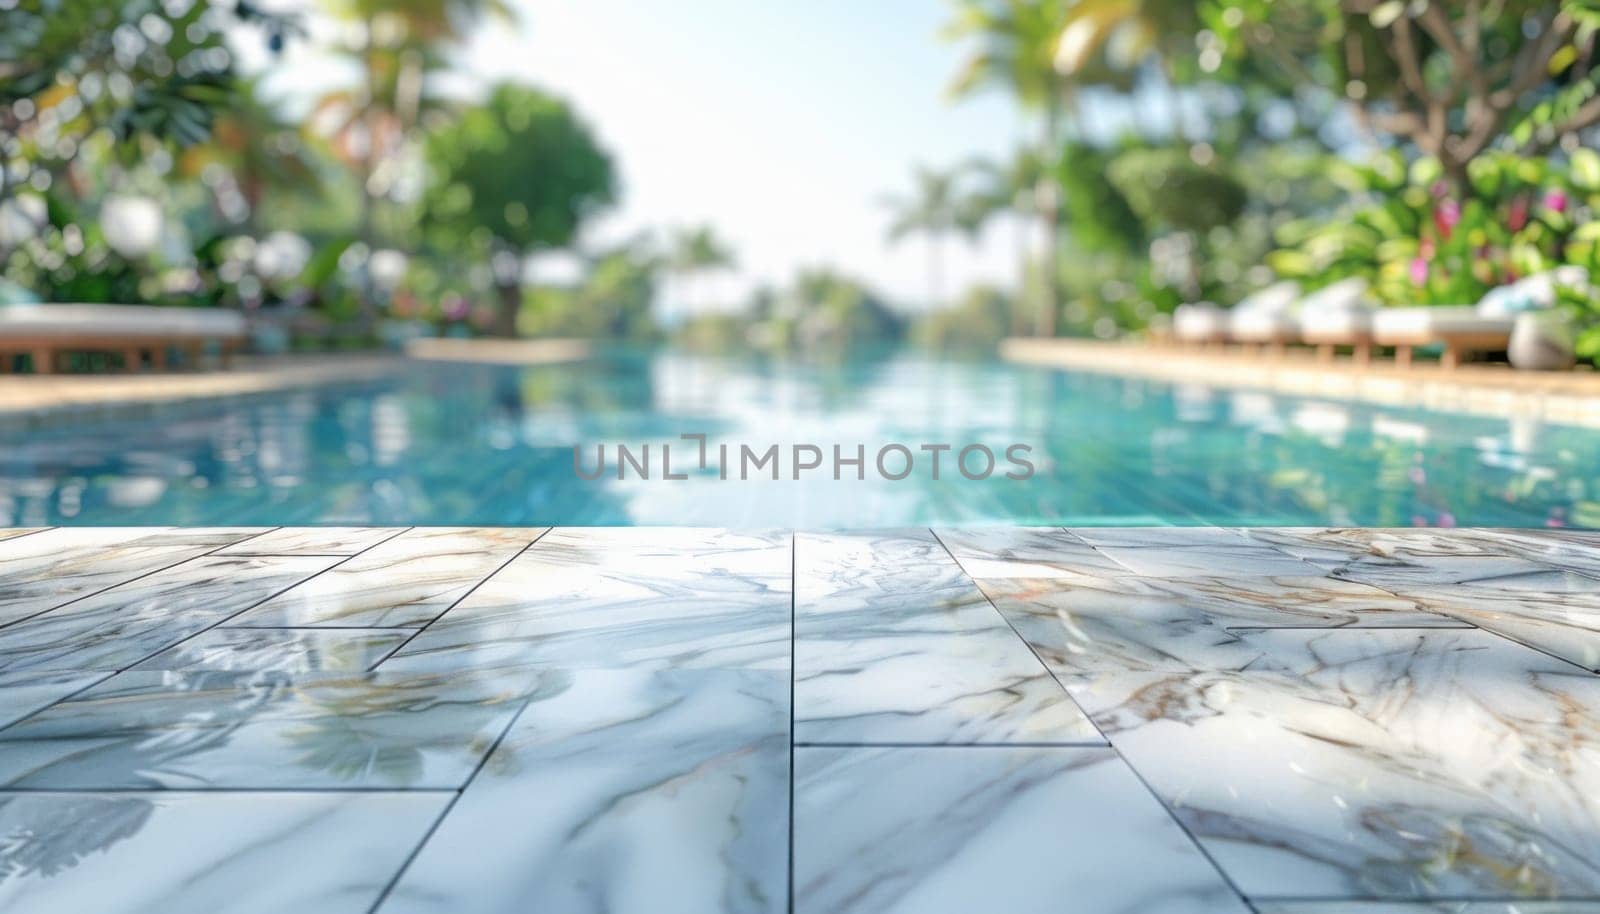 Marble floor in foreground, swimming pool in background. Keywords water, swimming pool, natural landscape